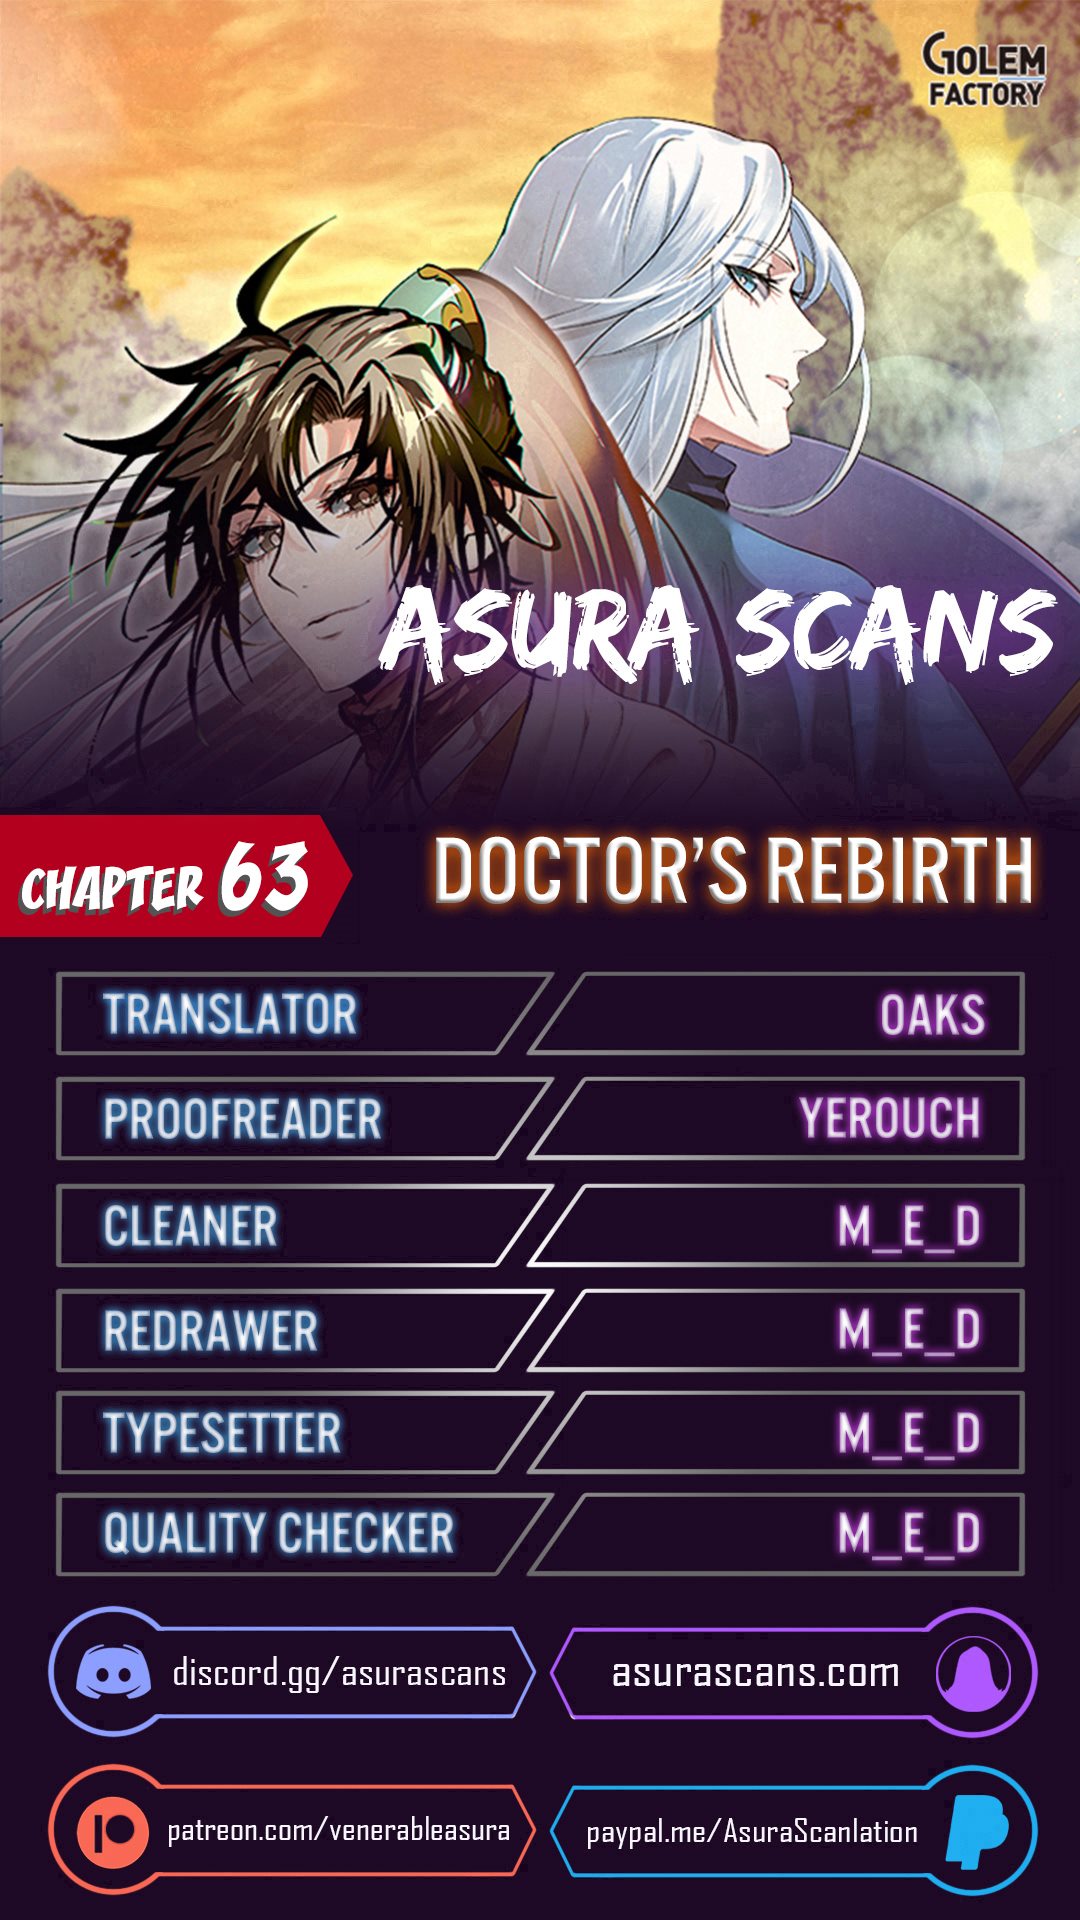 Doctor's Rebirth - Chapter 19080 - Page 1